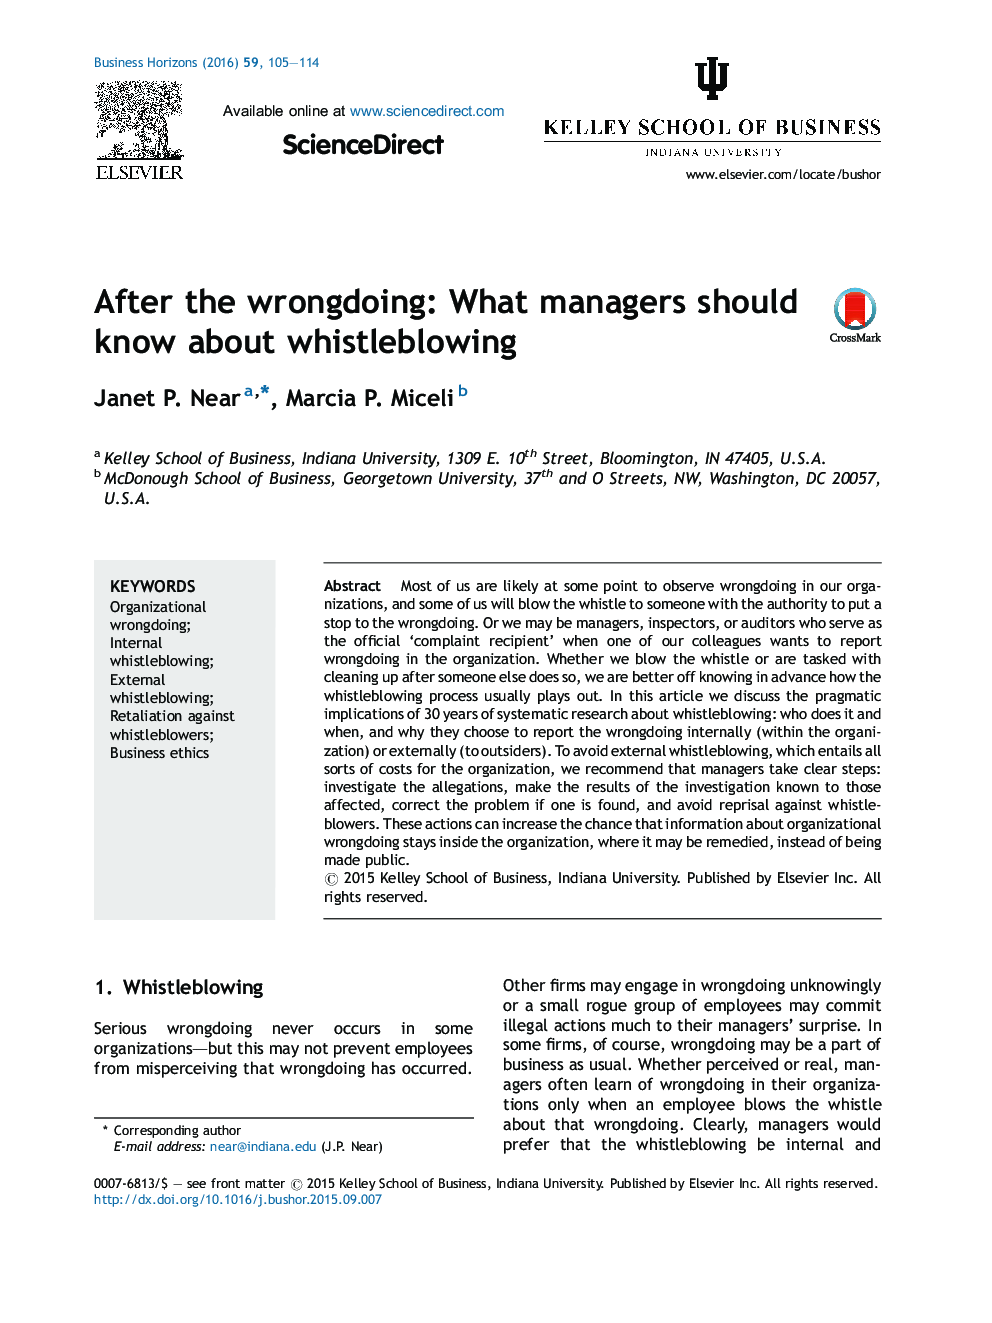 After the wrongdoing: What managers should know about whistleblowing